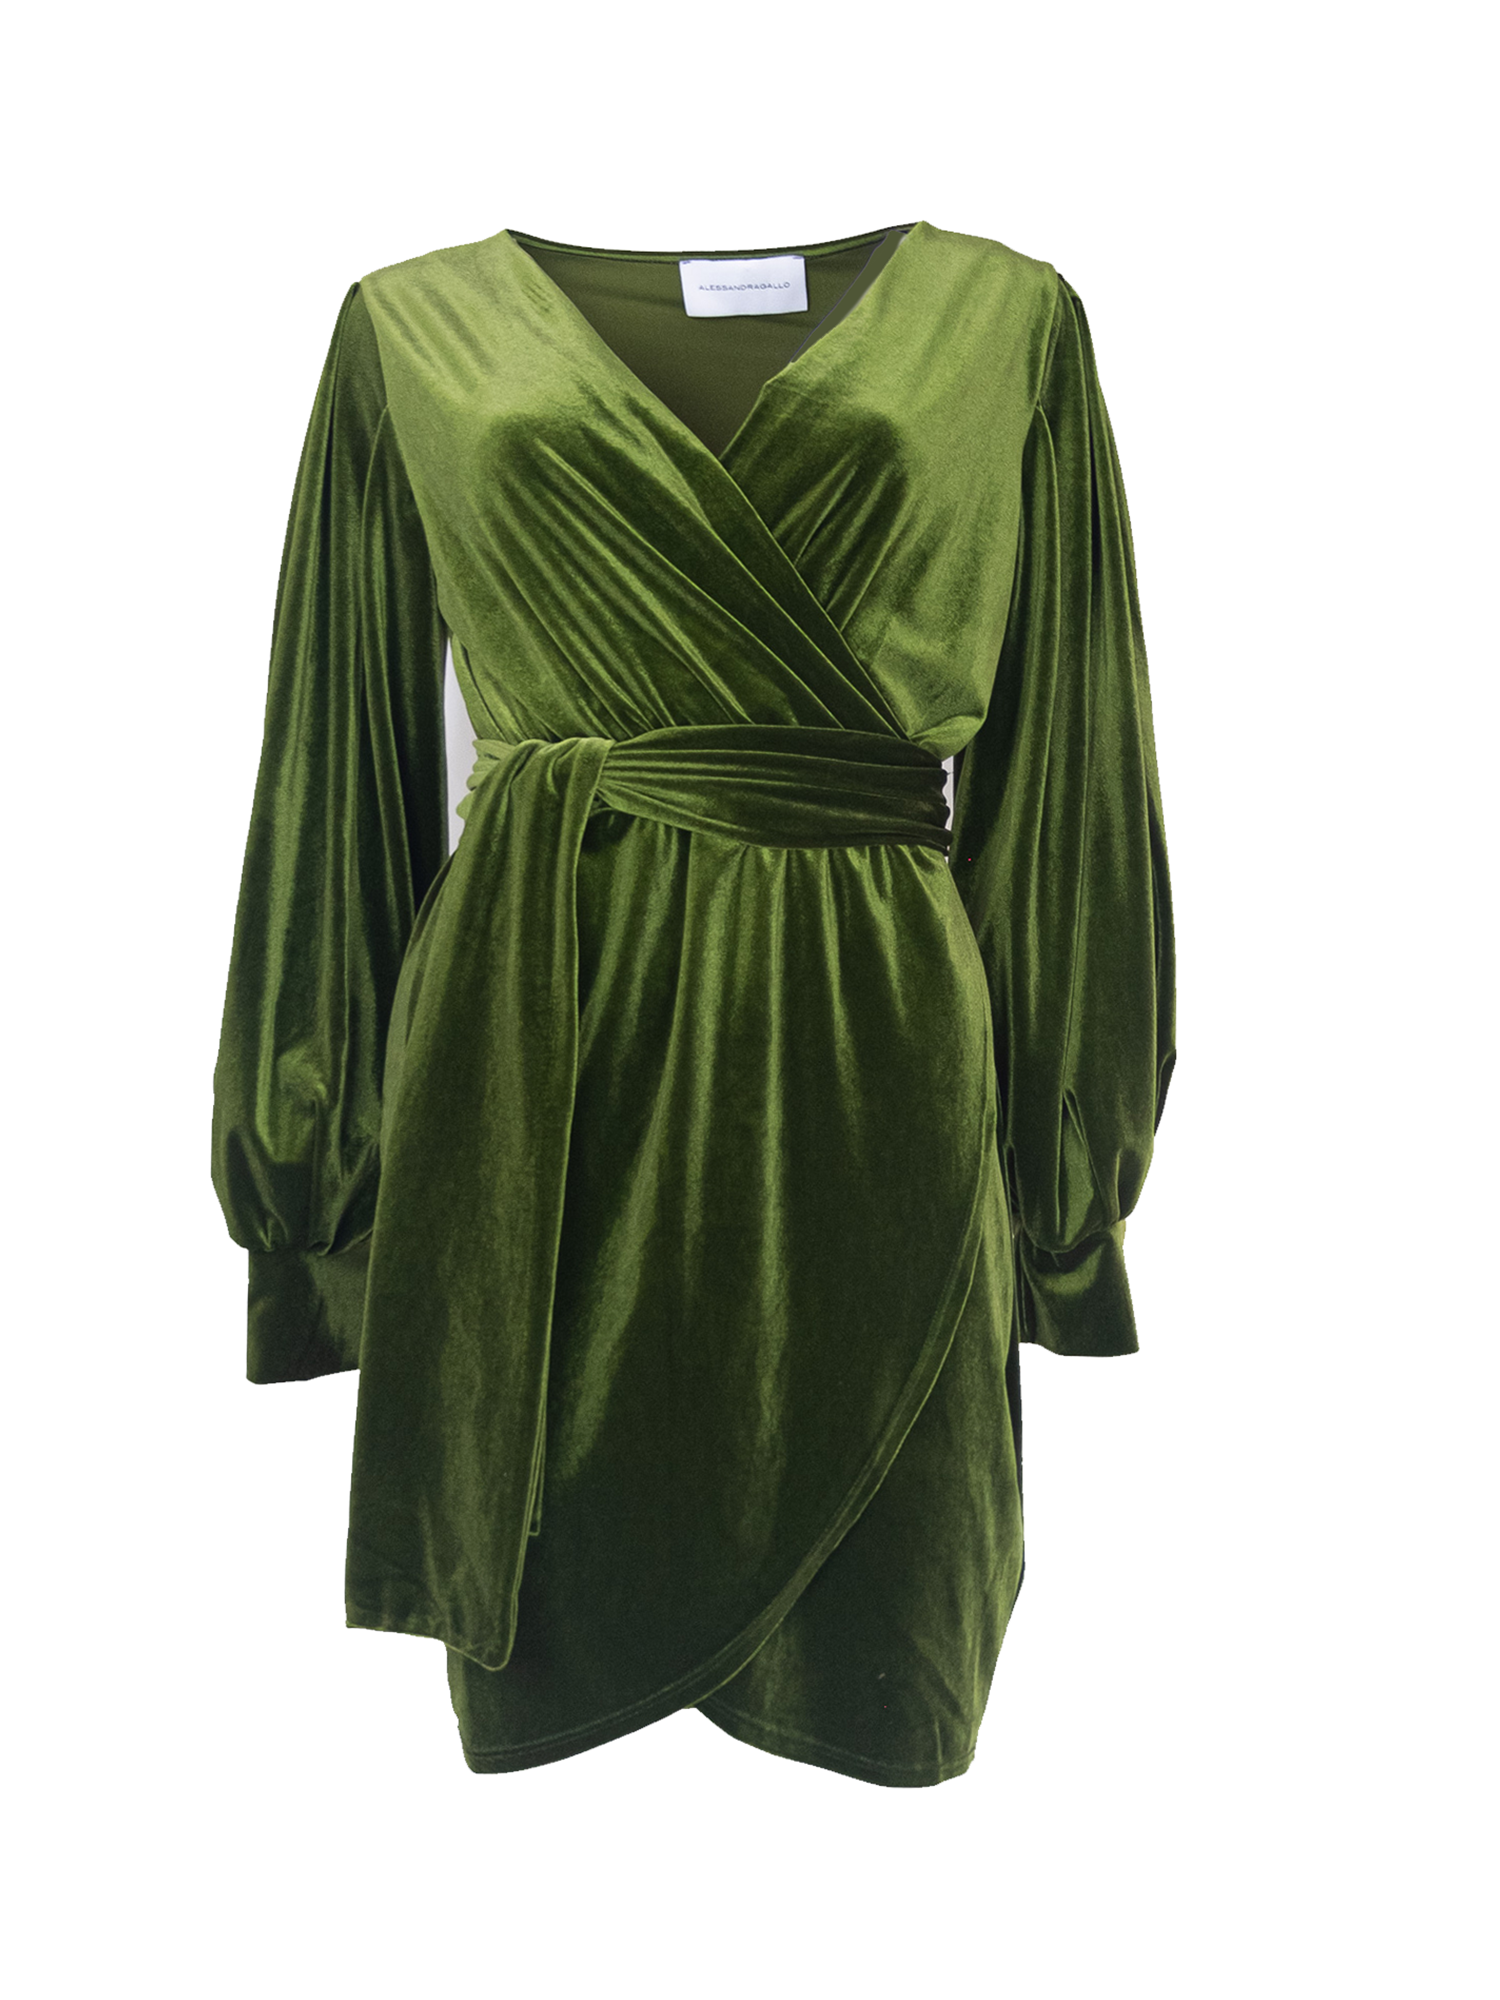 OFELIA - short dress with wide sleeve and sash in green chenille